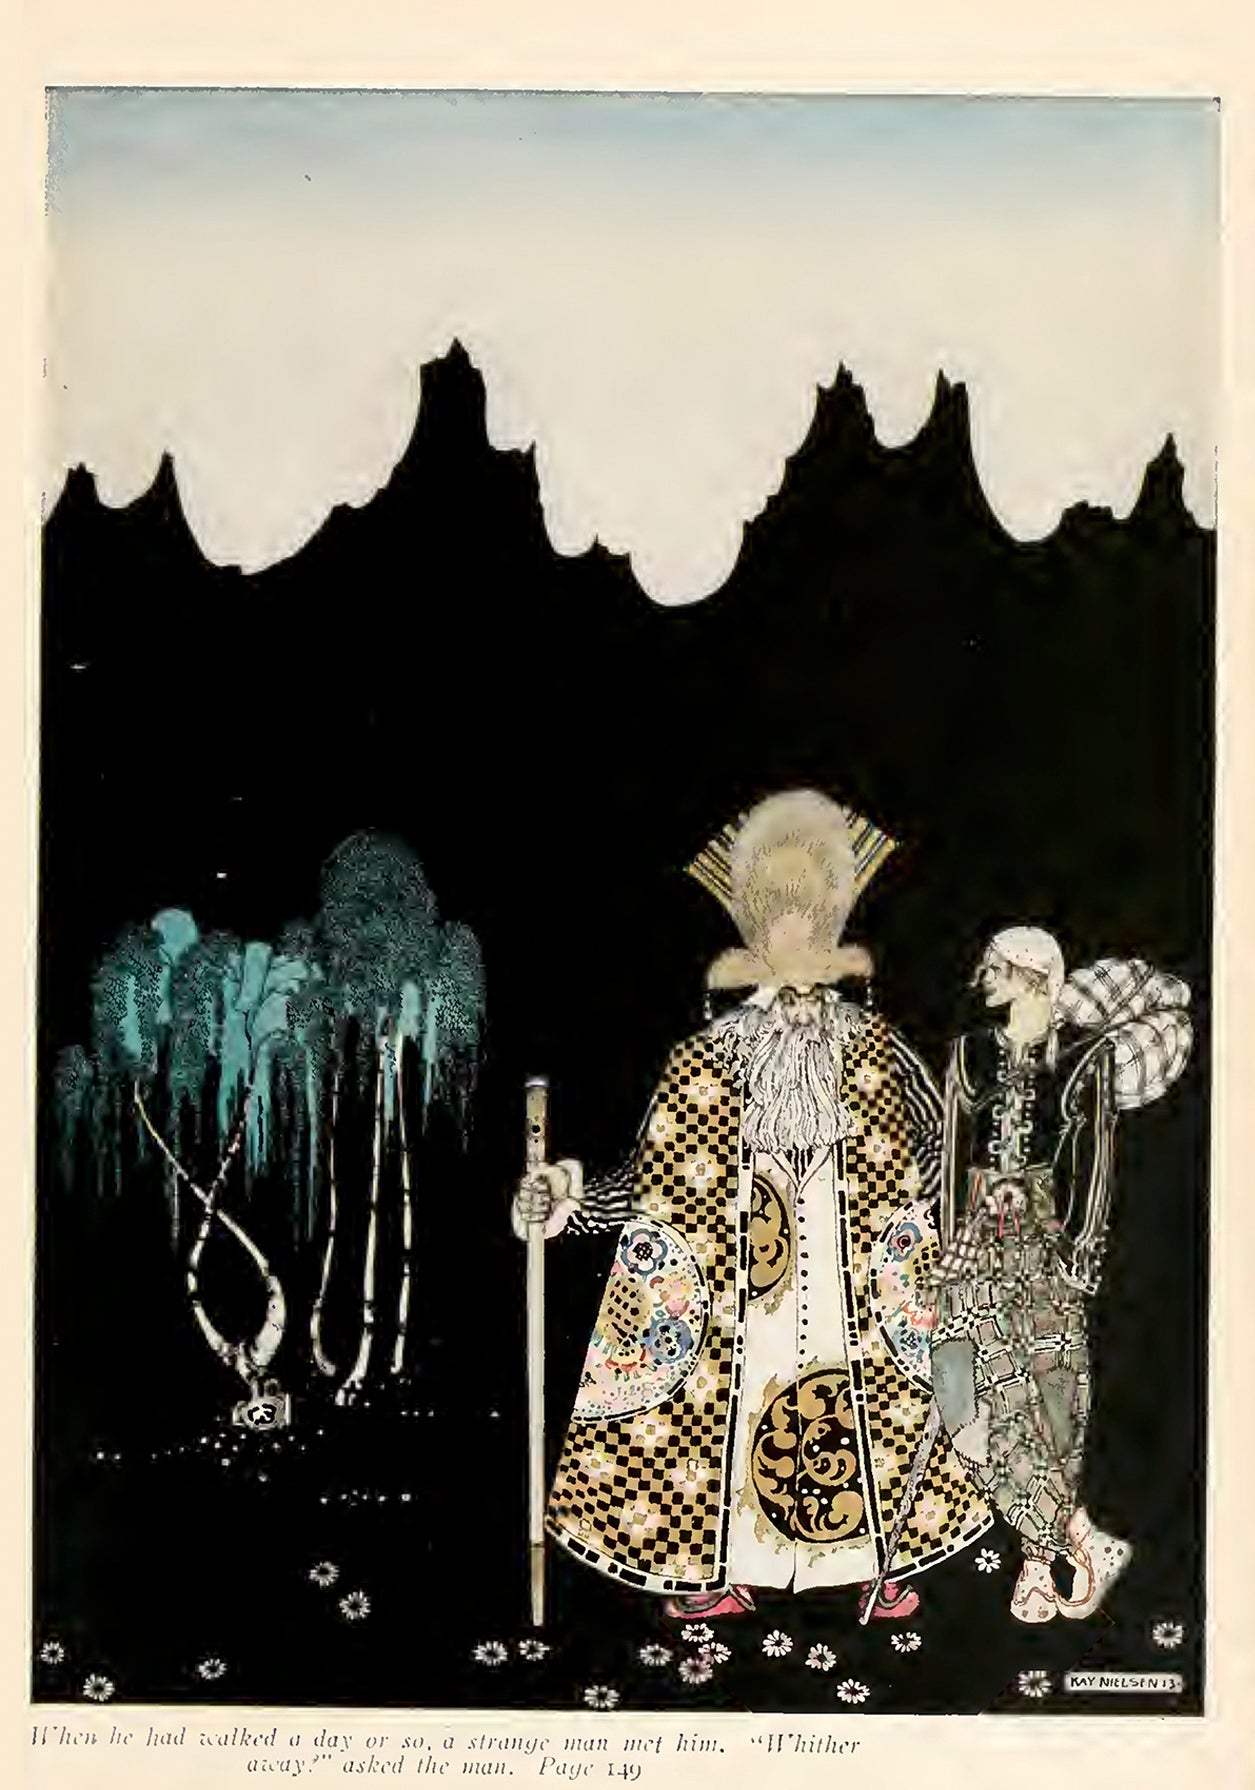 East of the Sun and West of the Moon XI, illustrated by Kay Nielsen, 1915 - Postcard